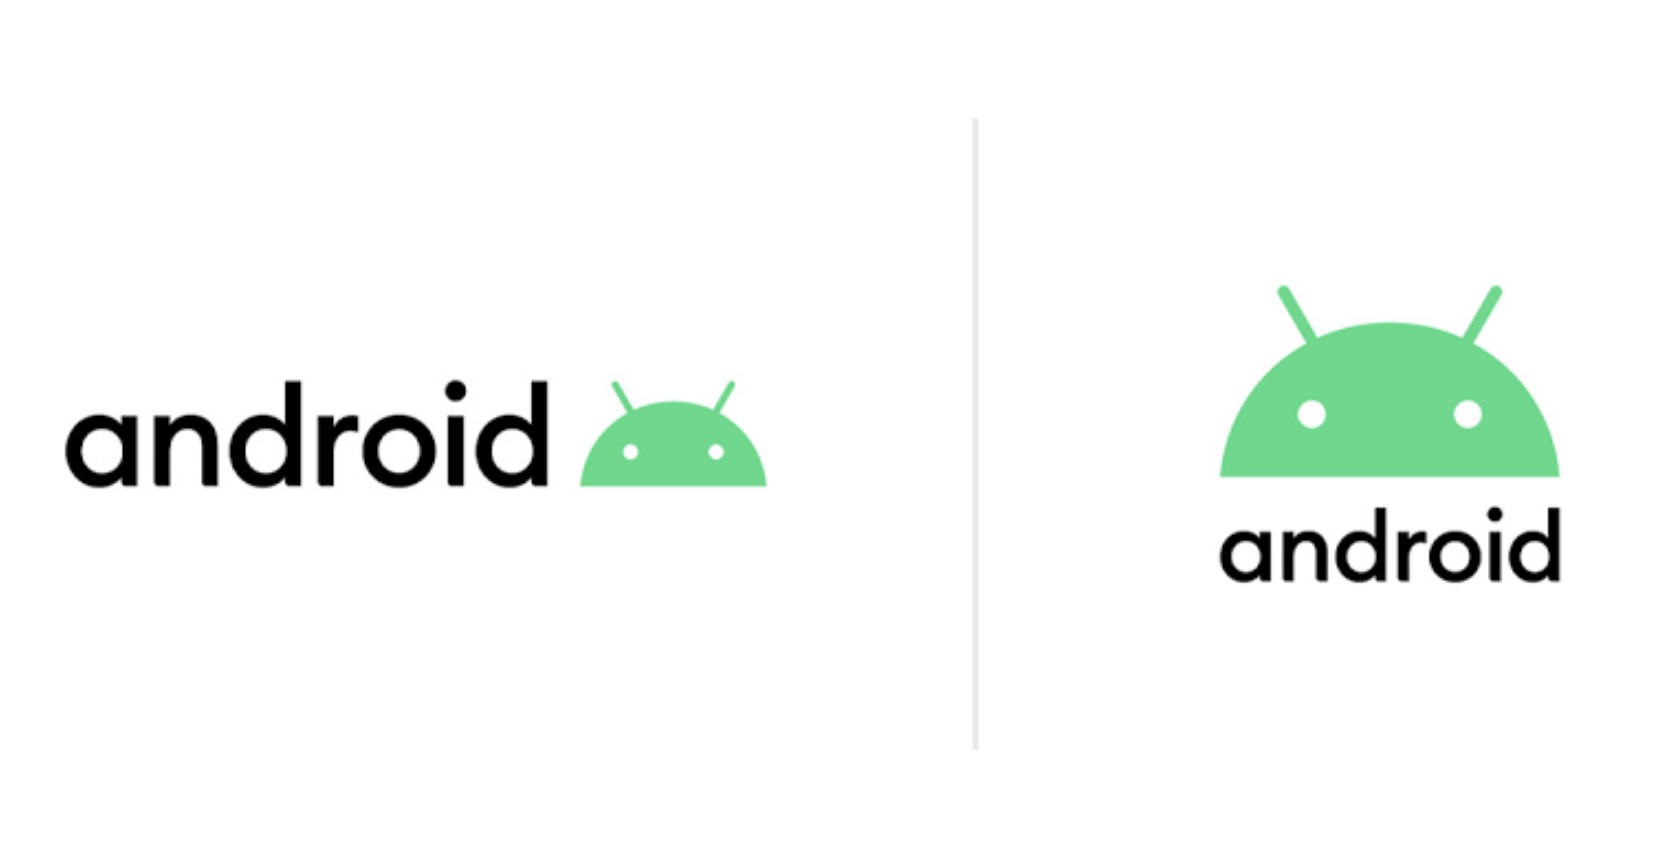 Google changes Android naming tradition, introduces new logo